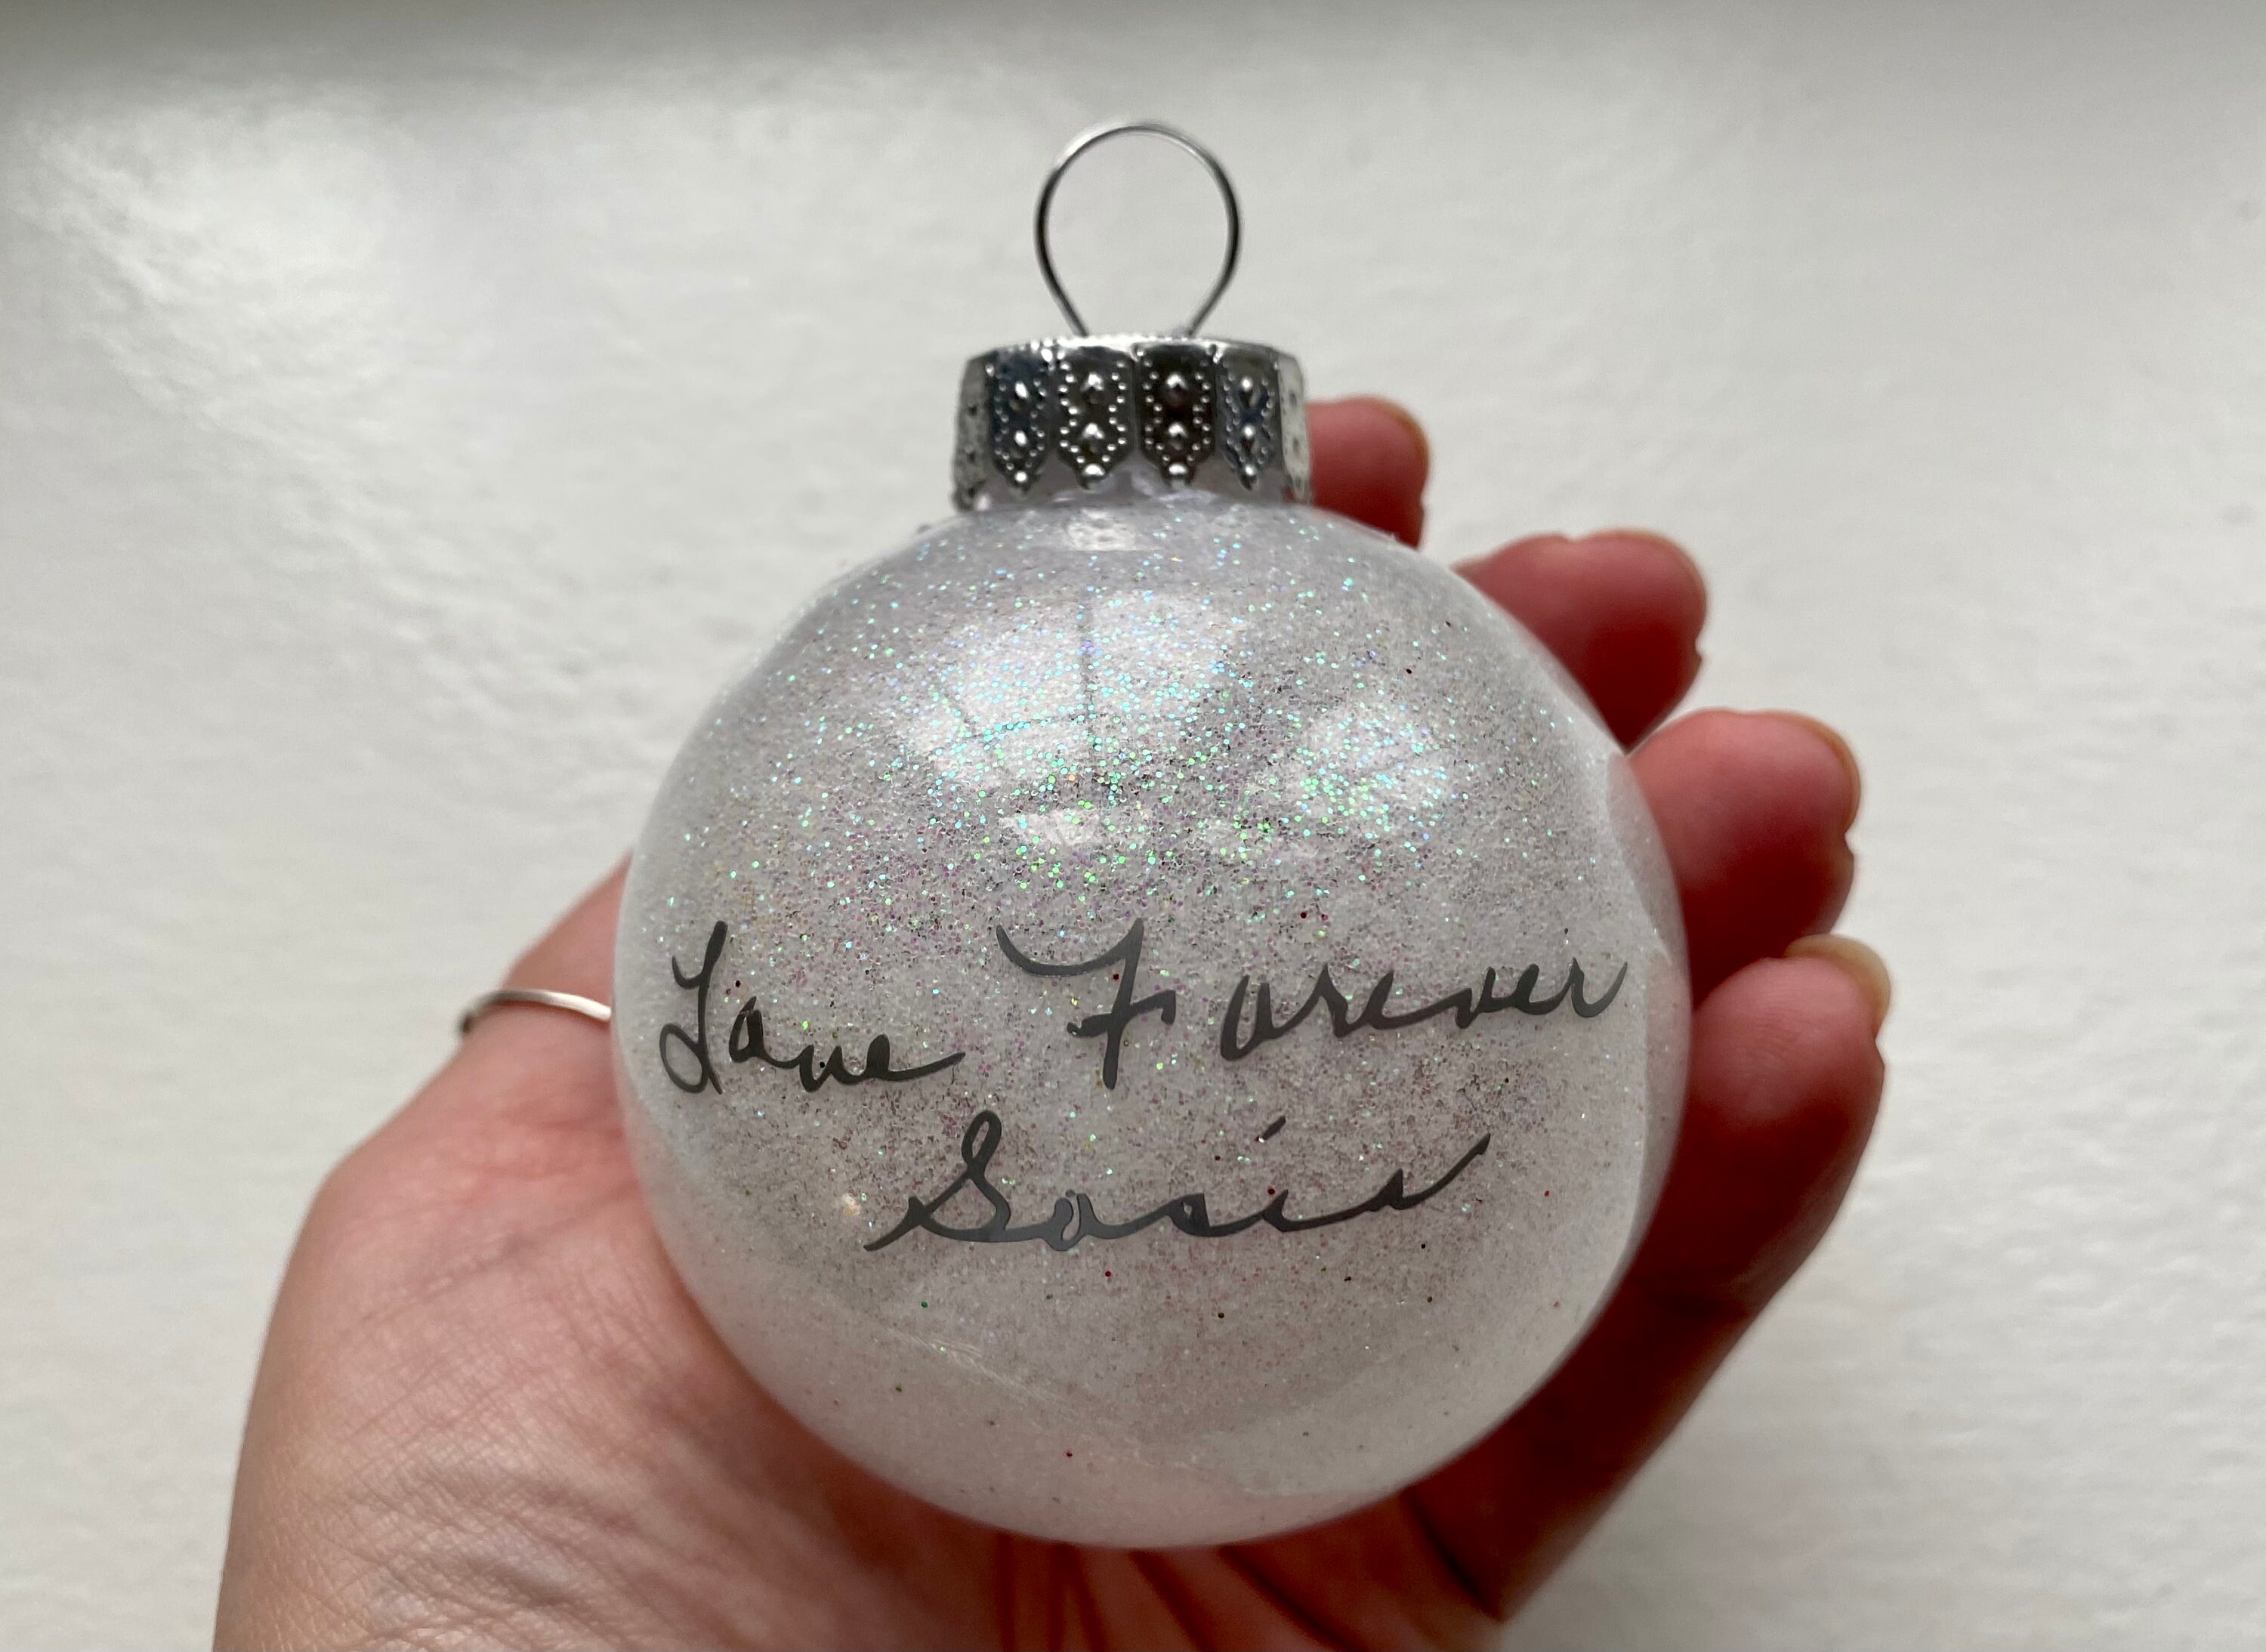 Gifts for Him Gifts for Her Customized Ornaments Memorial Gift Remembrance Gift Handwriting Ornaments Glitter Personalized Ornaments